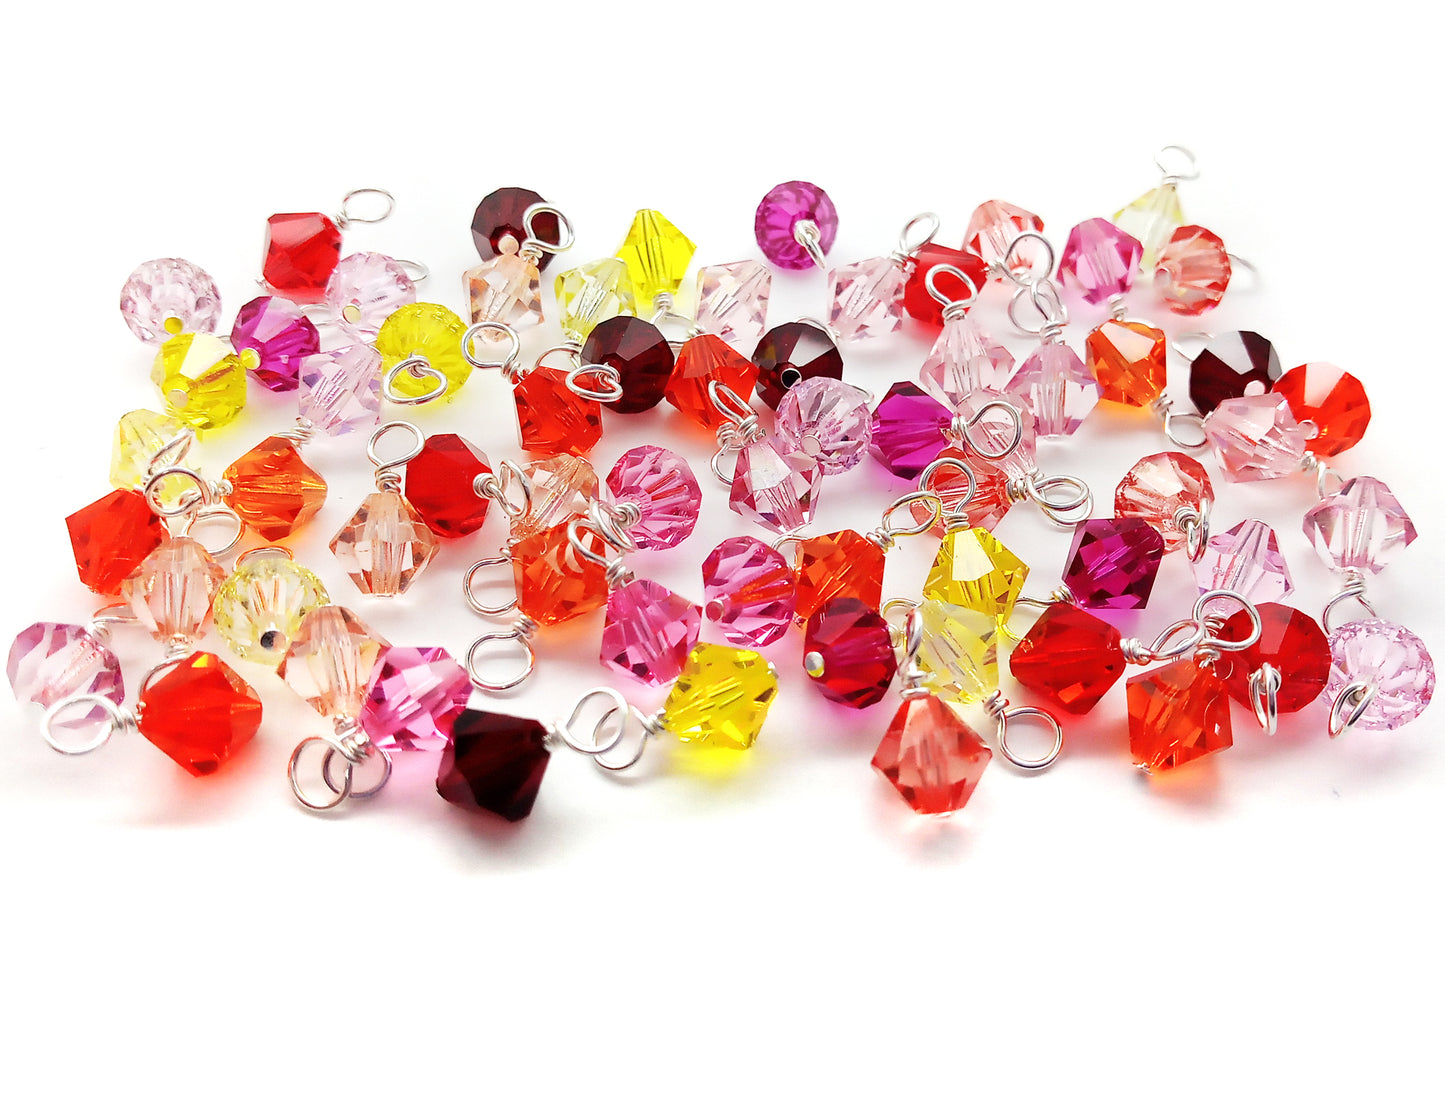 25 Bicone Dangles, Mix of Bead Charms in Red, Orange, Yellow & Pink, 6mm Bicone Beads